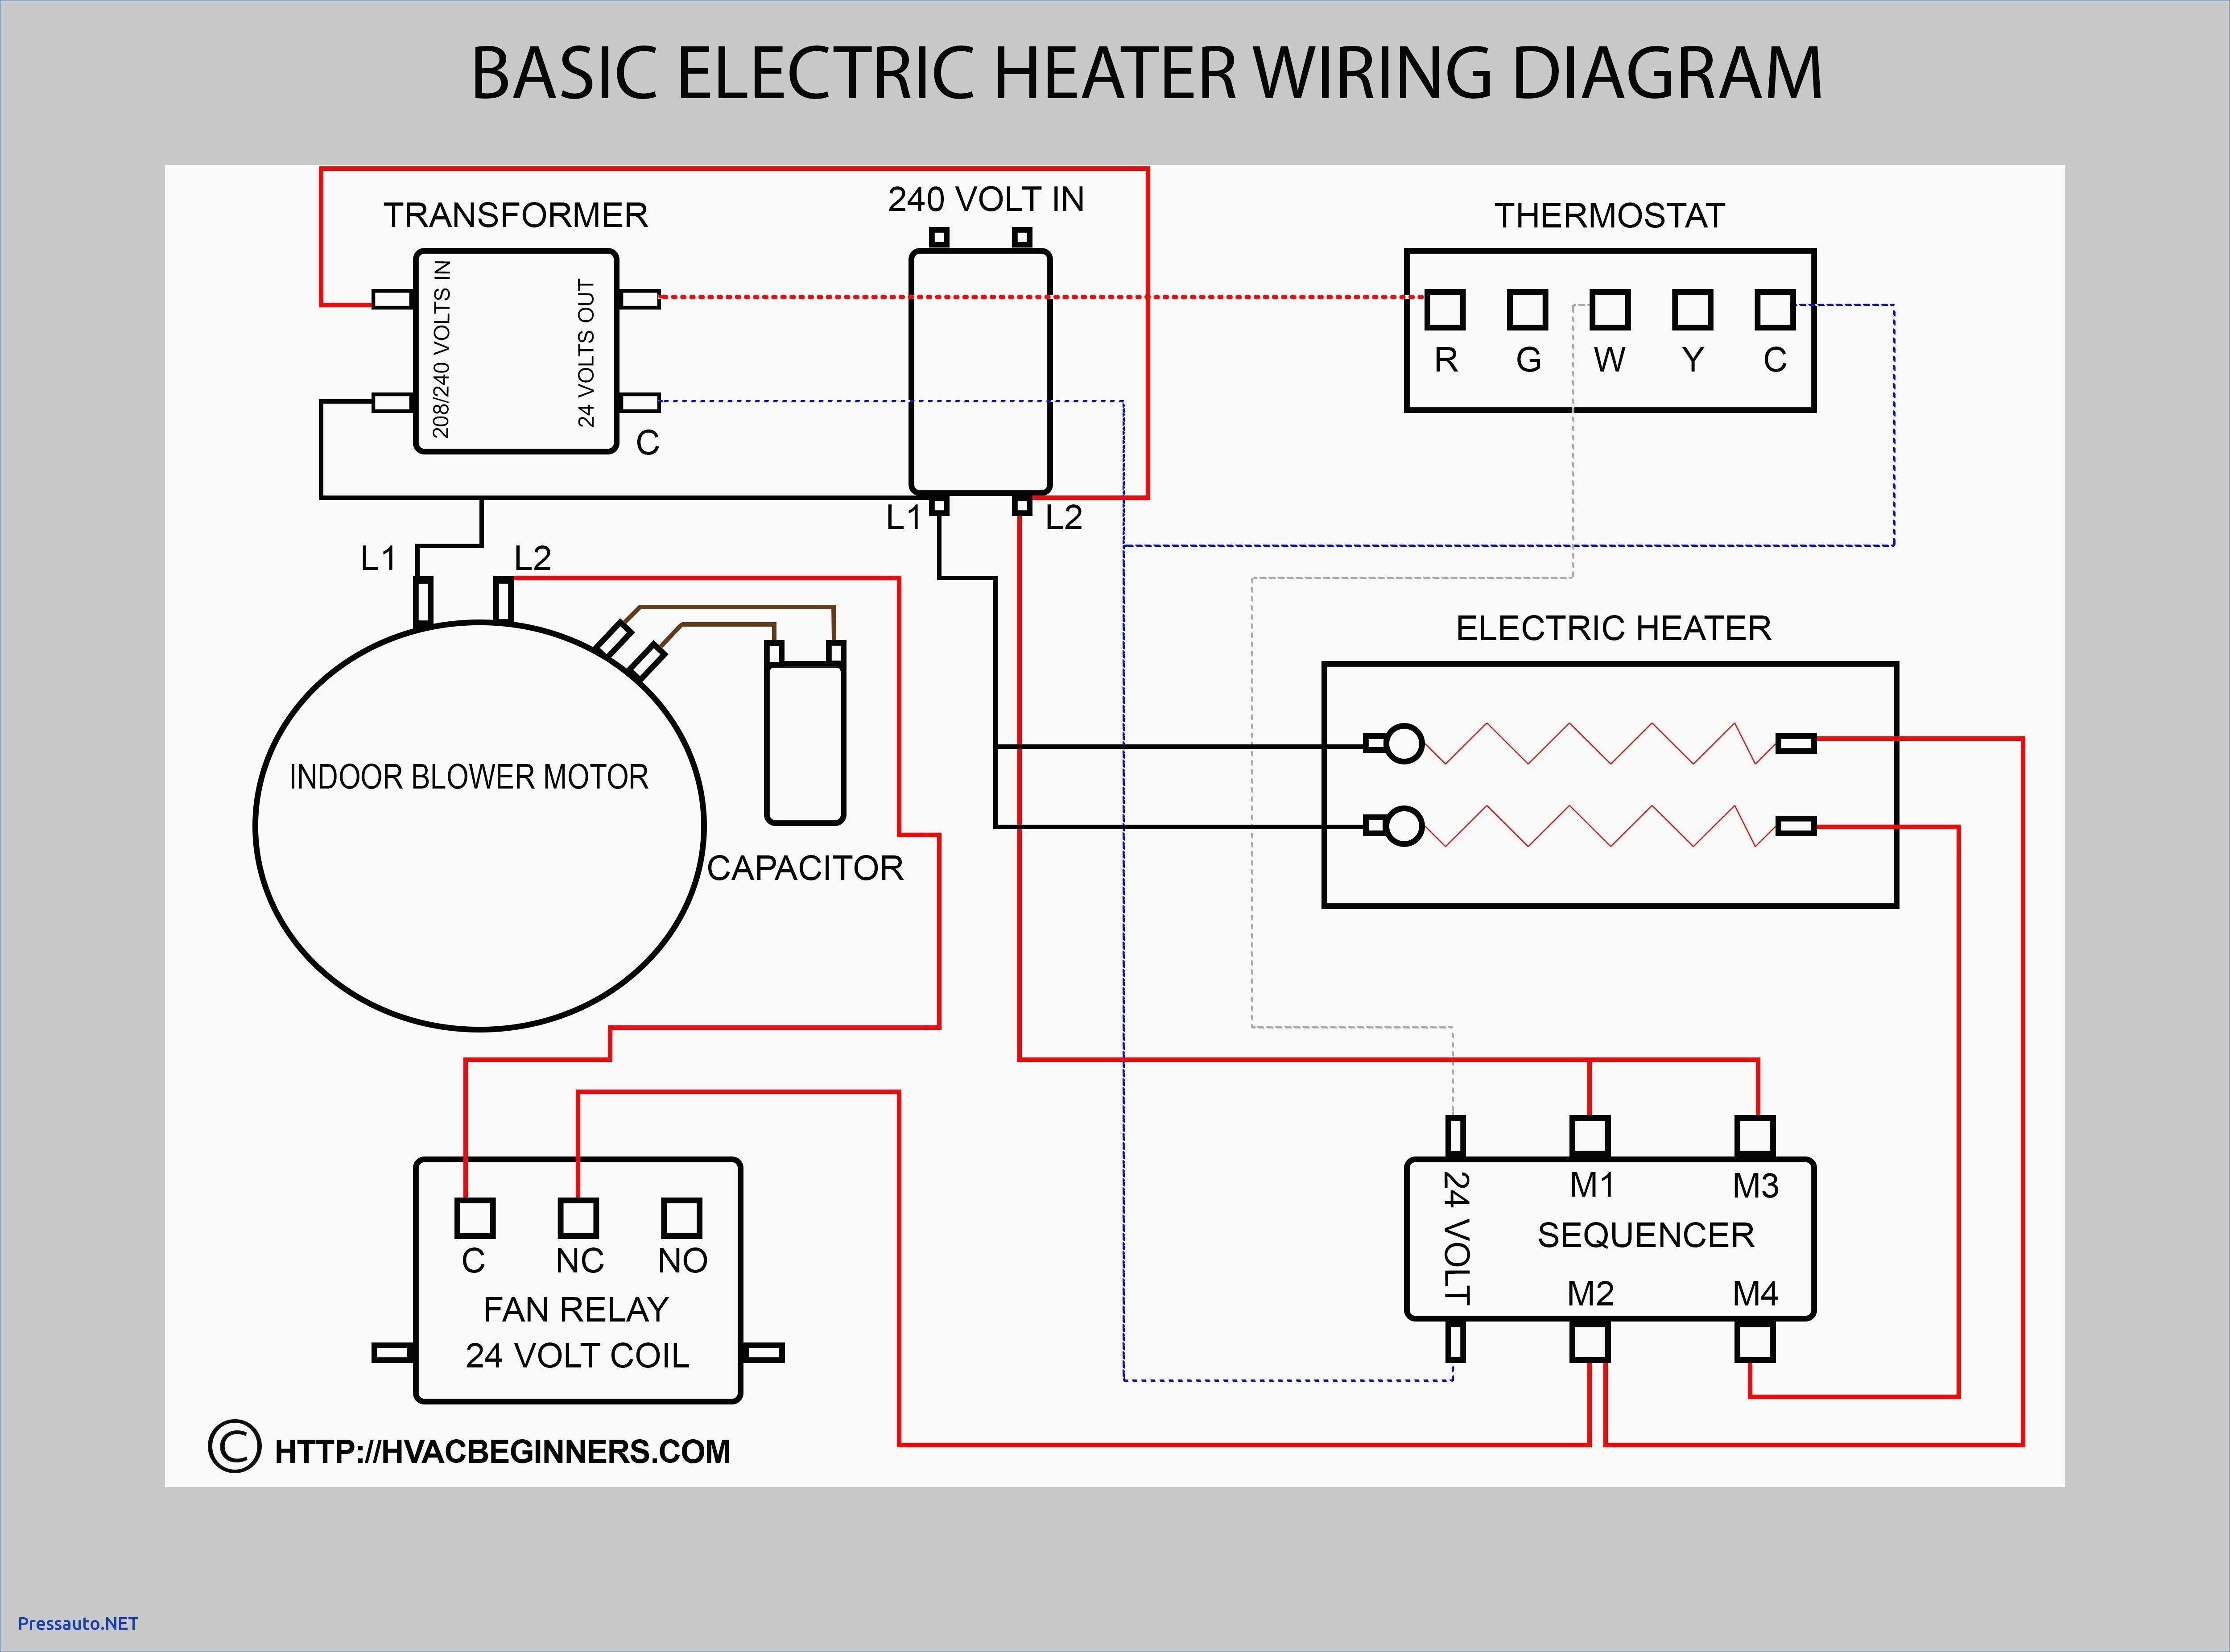 Heat Sequencer Wiring Diagram New Electric Heat Wiring Diagram Heat Sequencer Wiring Diagram Collection